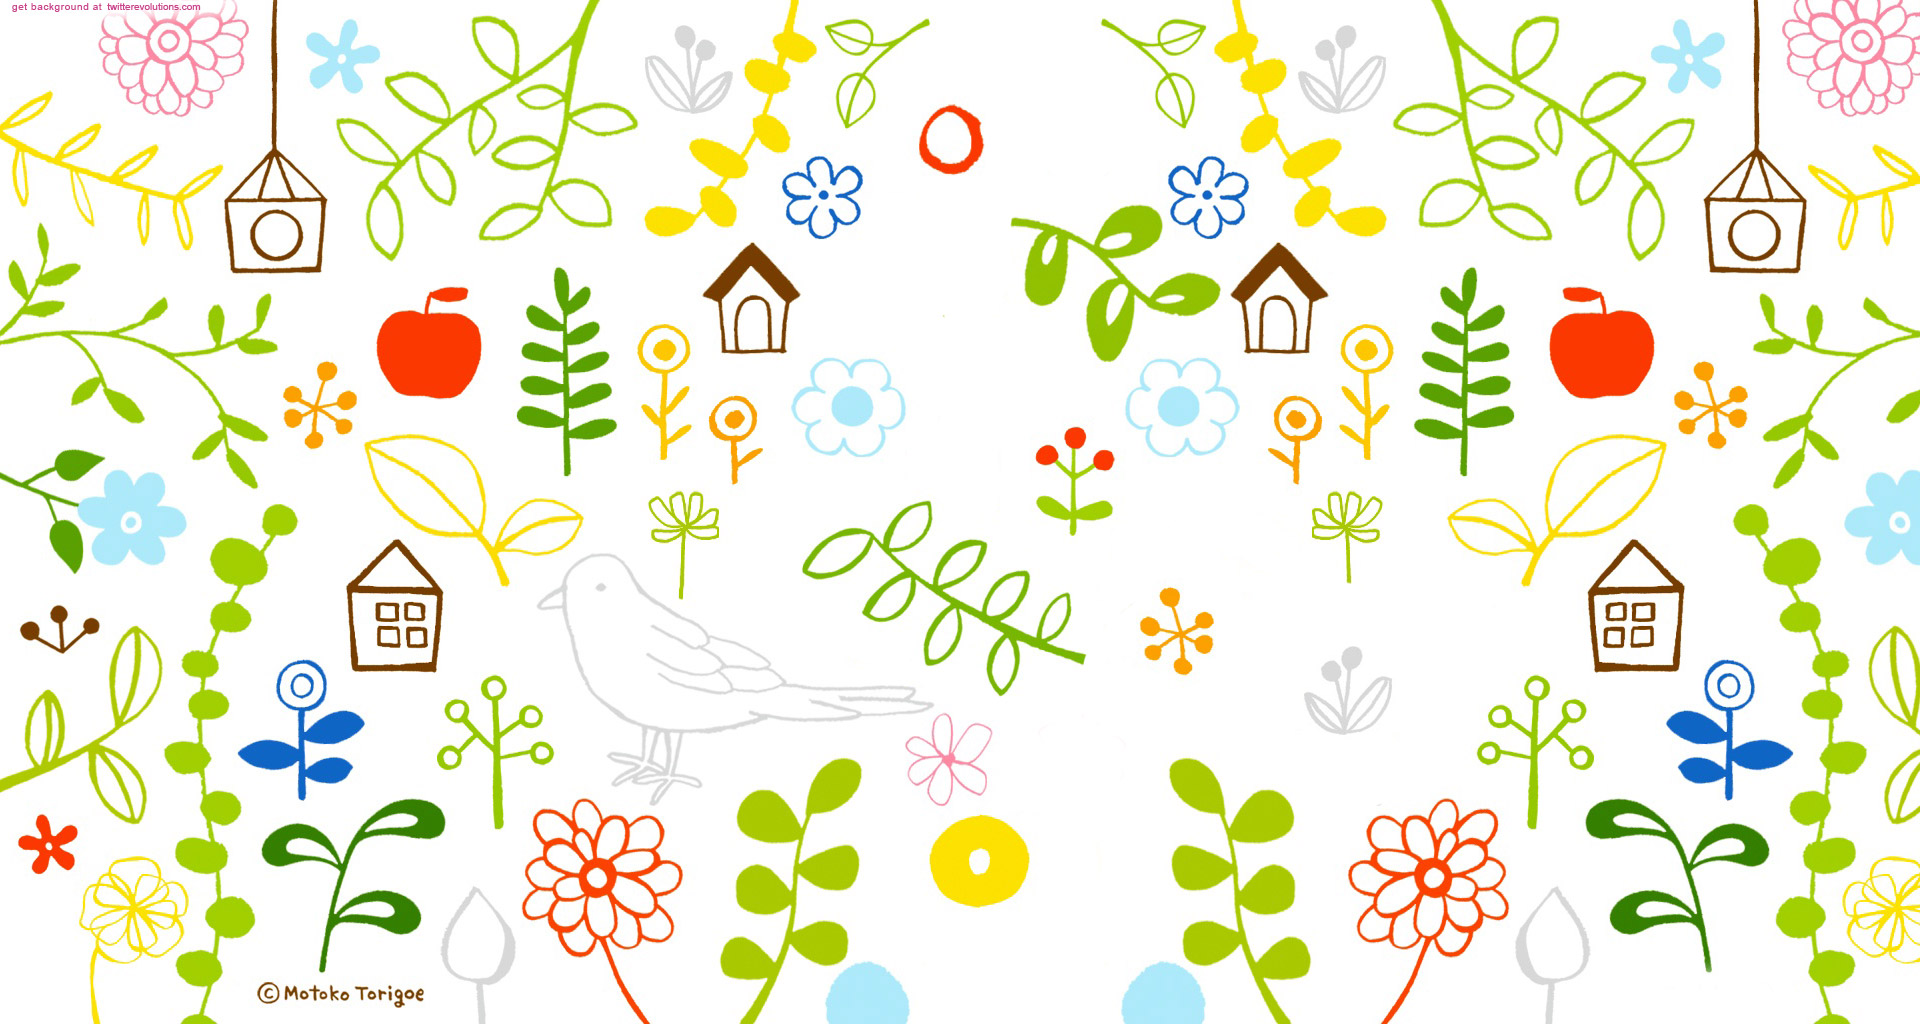 Cute girly pattern background Twitterevolutions